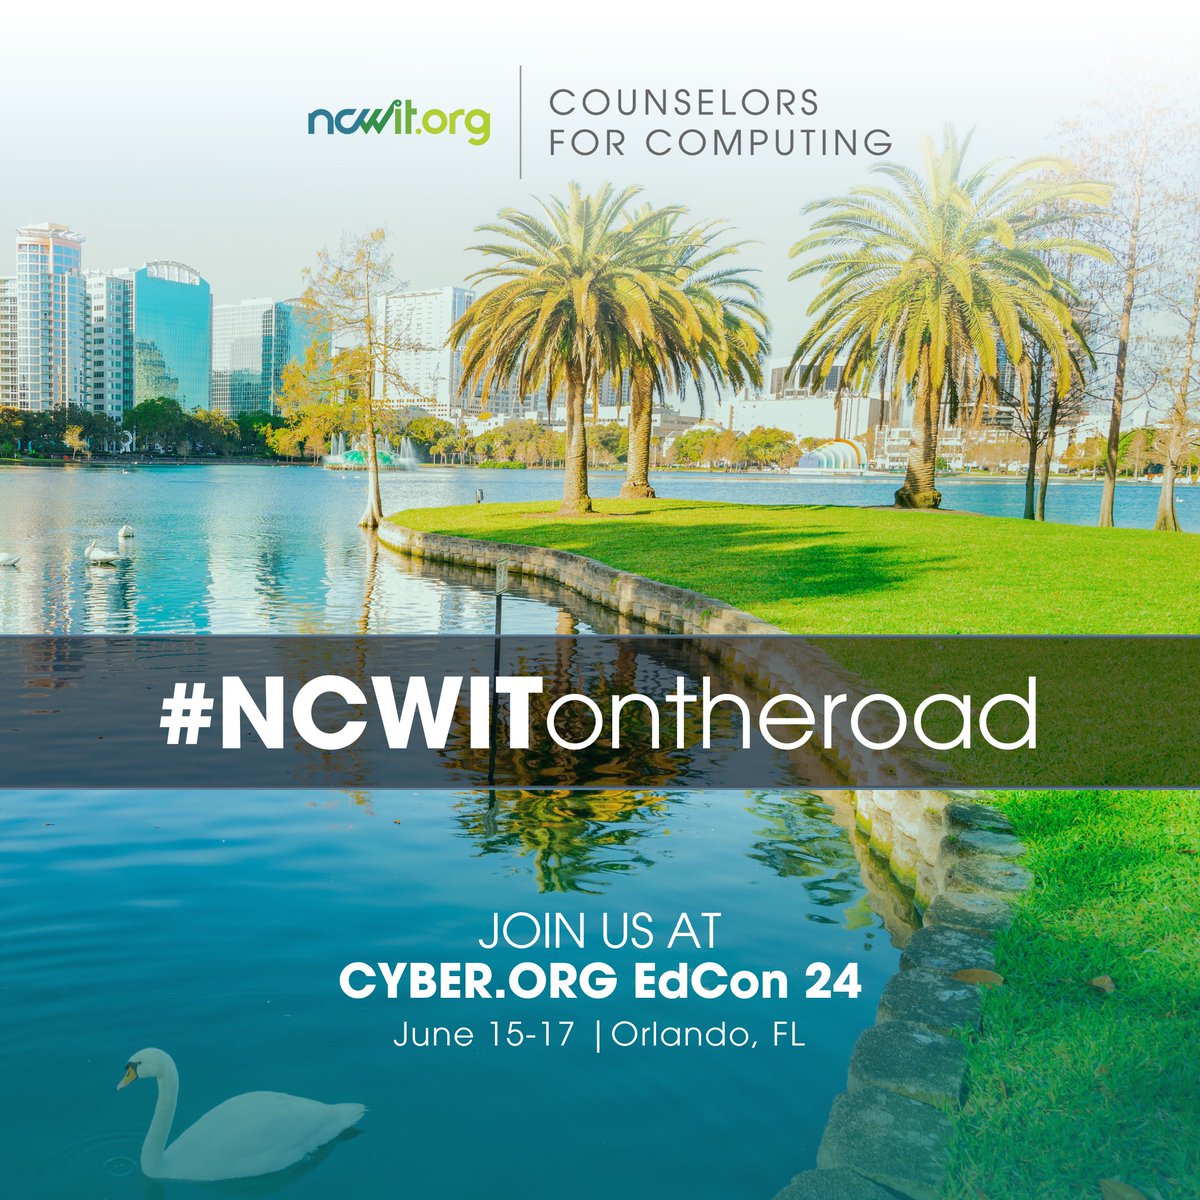 K-5 counselors and educators attending @cyber_dot_org EdCon 24 in Orlando: Don't miss the #NCWITC4C #NCWITontheroad presentation designed to prepare the youngest students with:

🖍️ Future-Ready Foundations: Nurturing Early Curiosity & Safety

Learn more: ncwit.org/event/ncwitc4c…